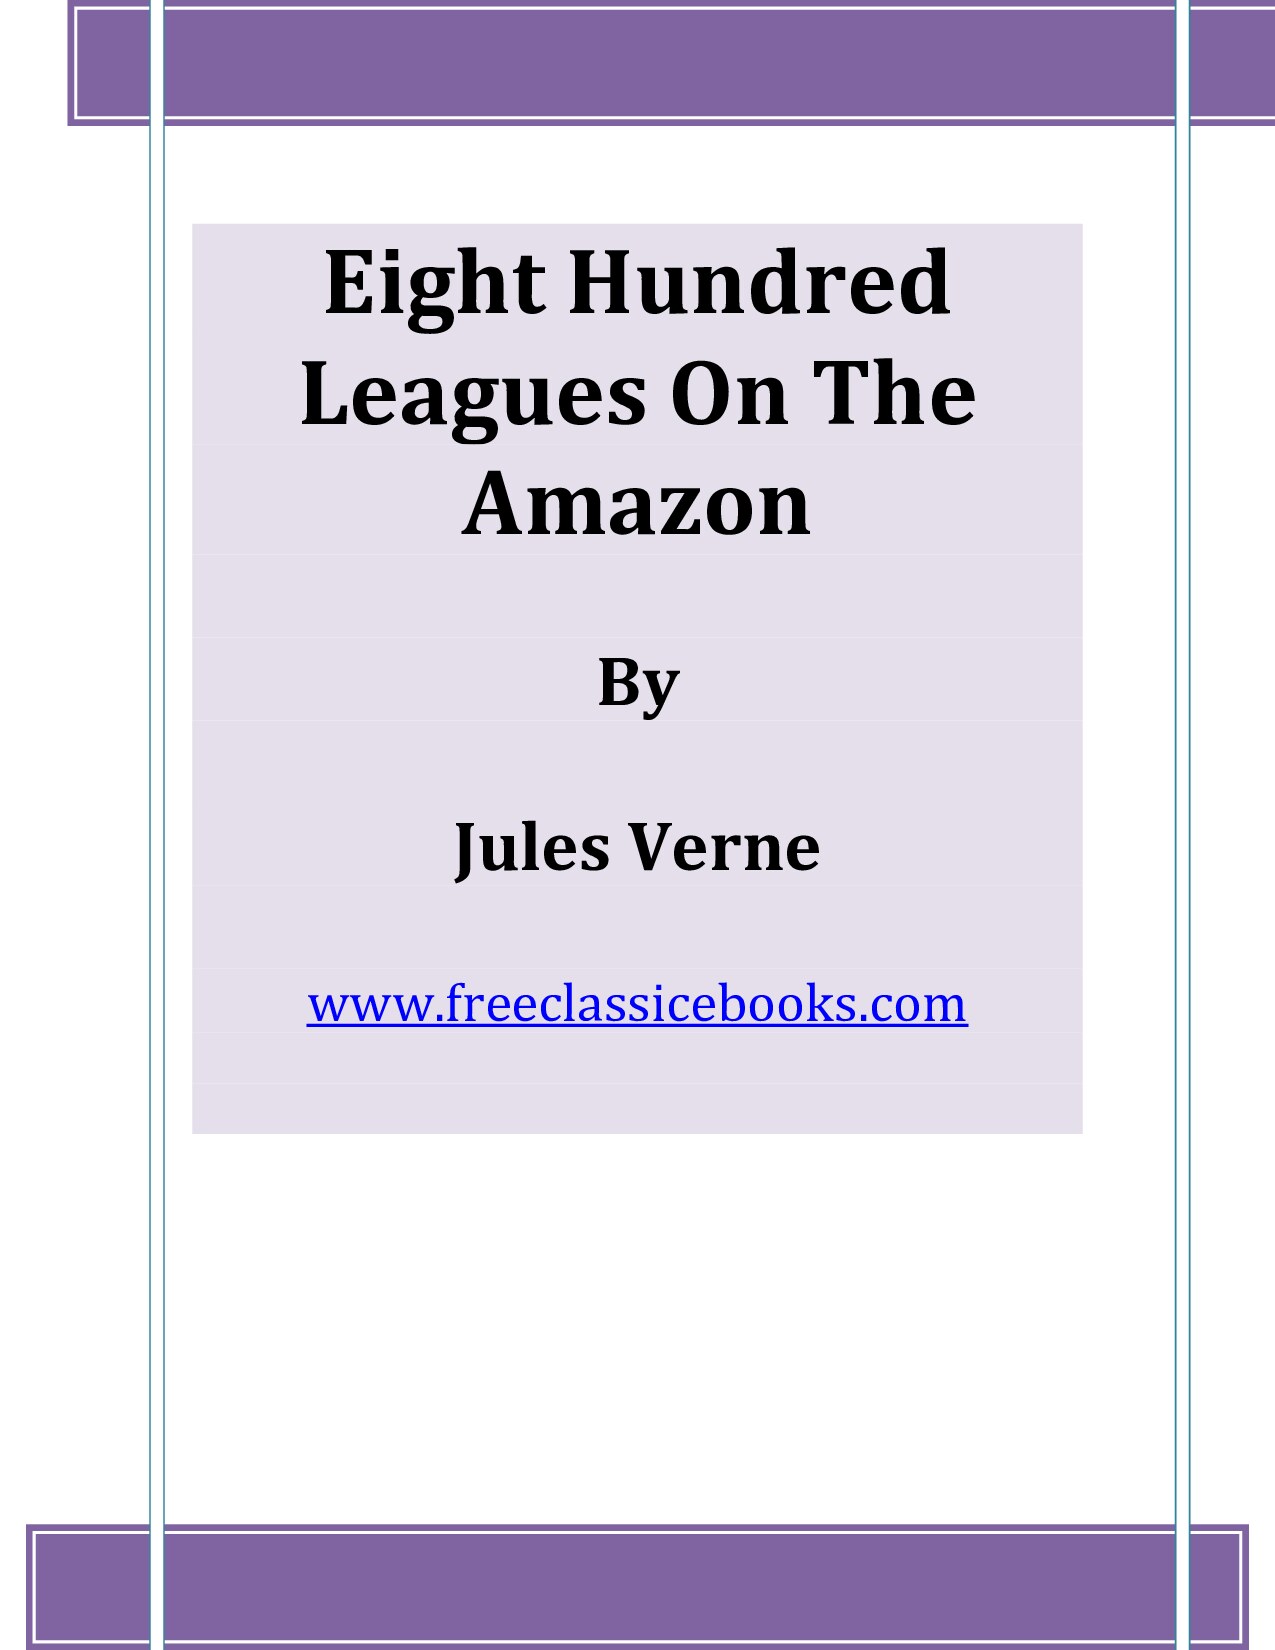 Microsoft Word - Eight Hundred Leagues On The Amazon.doc